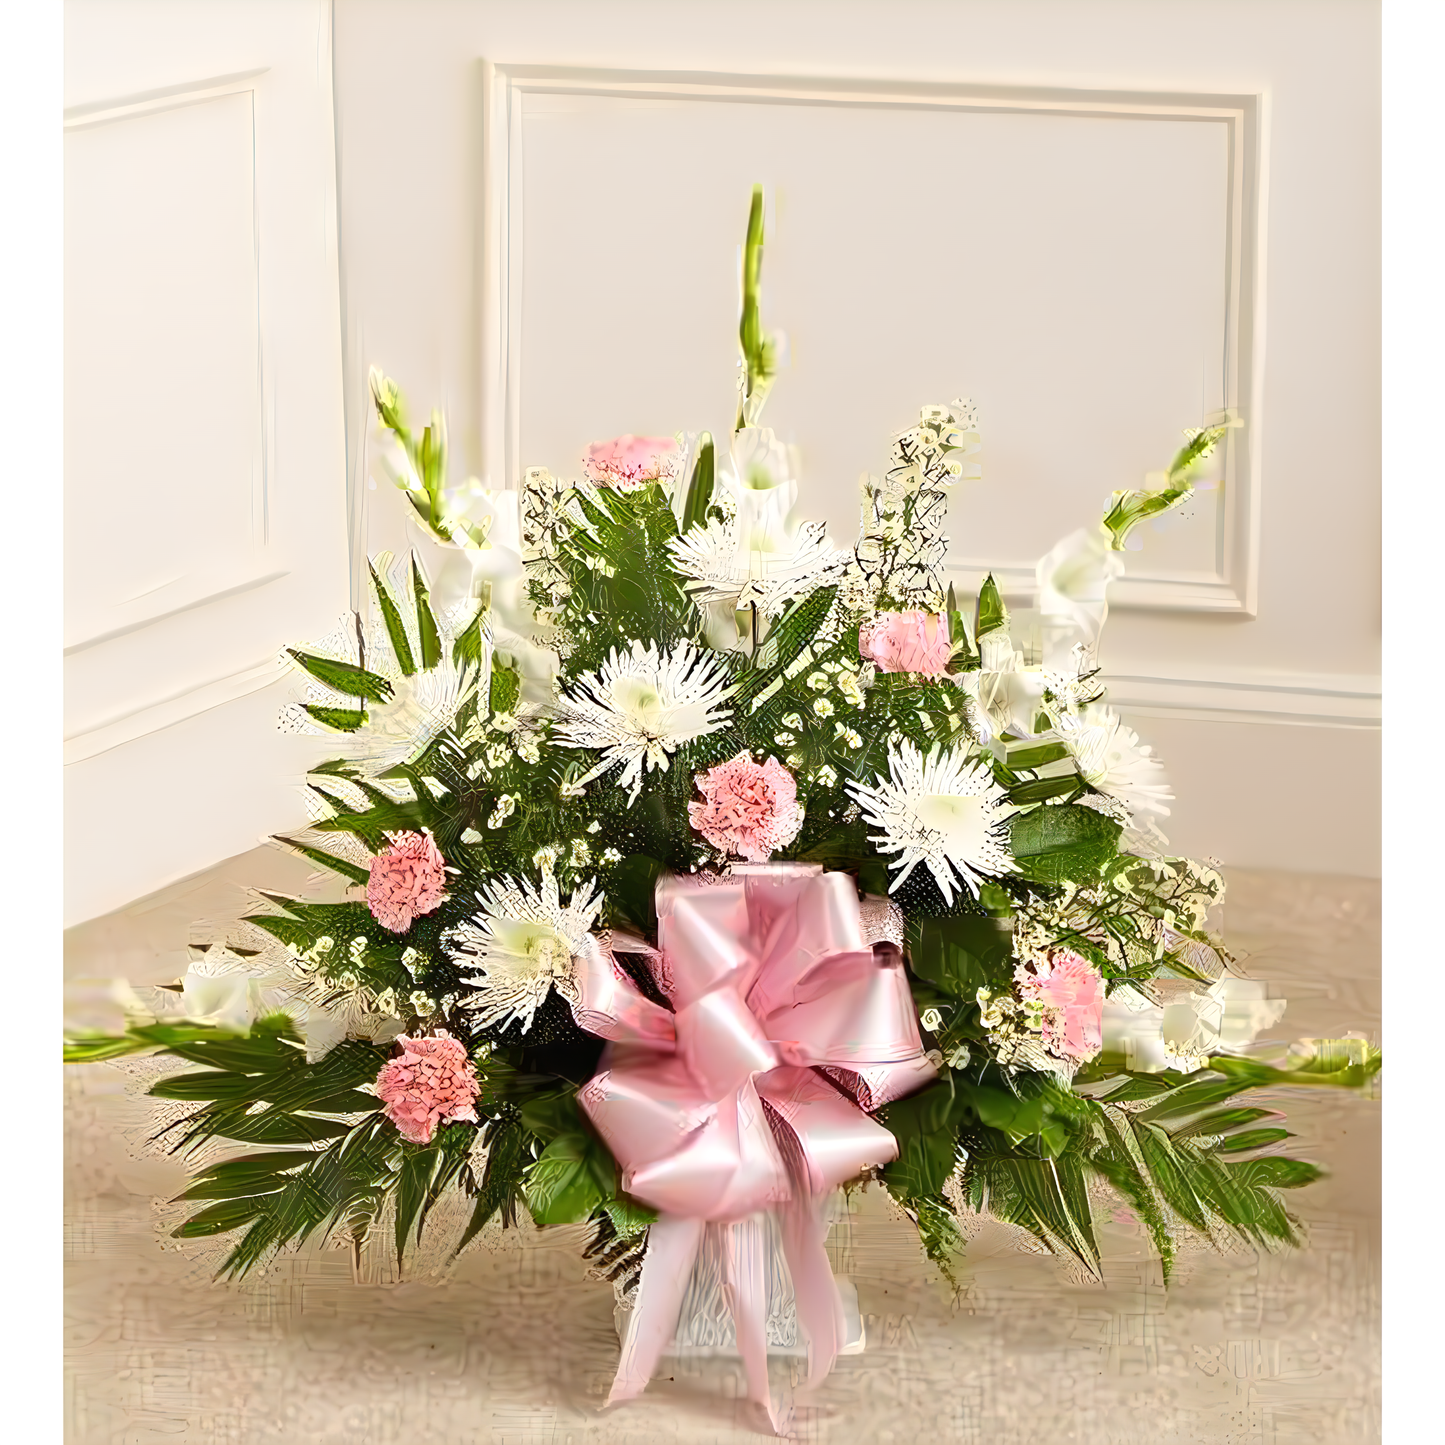 NYC Flower Delivery - Tribute Pink & White Floor Basket Arrangement - Funeral > For the Service